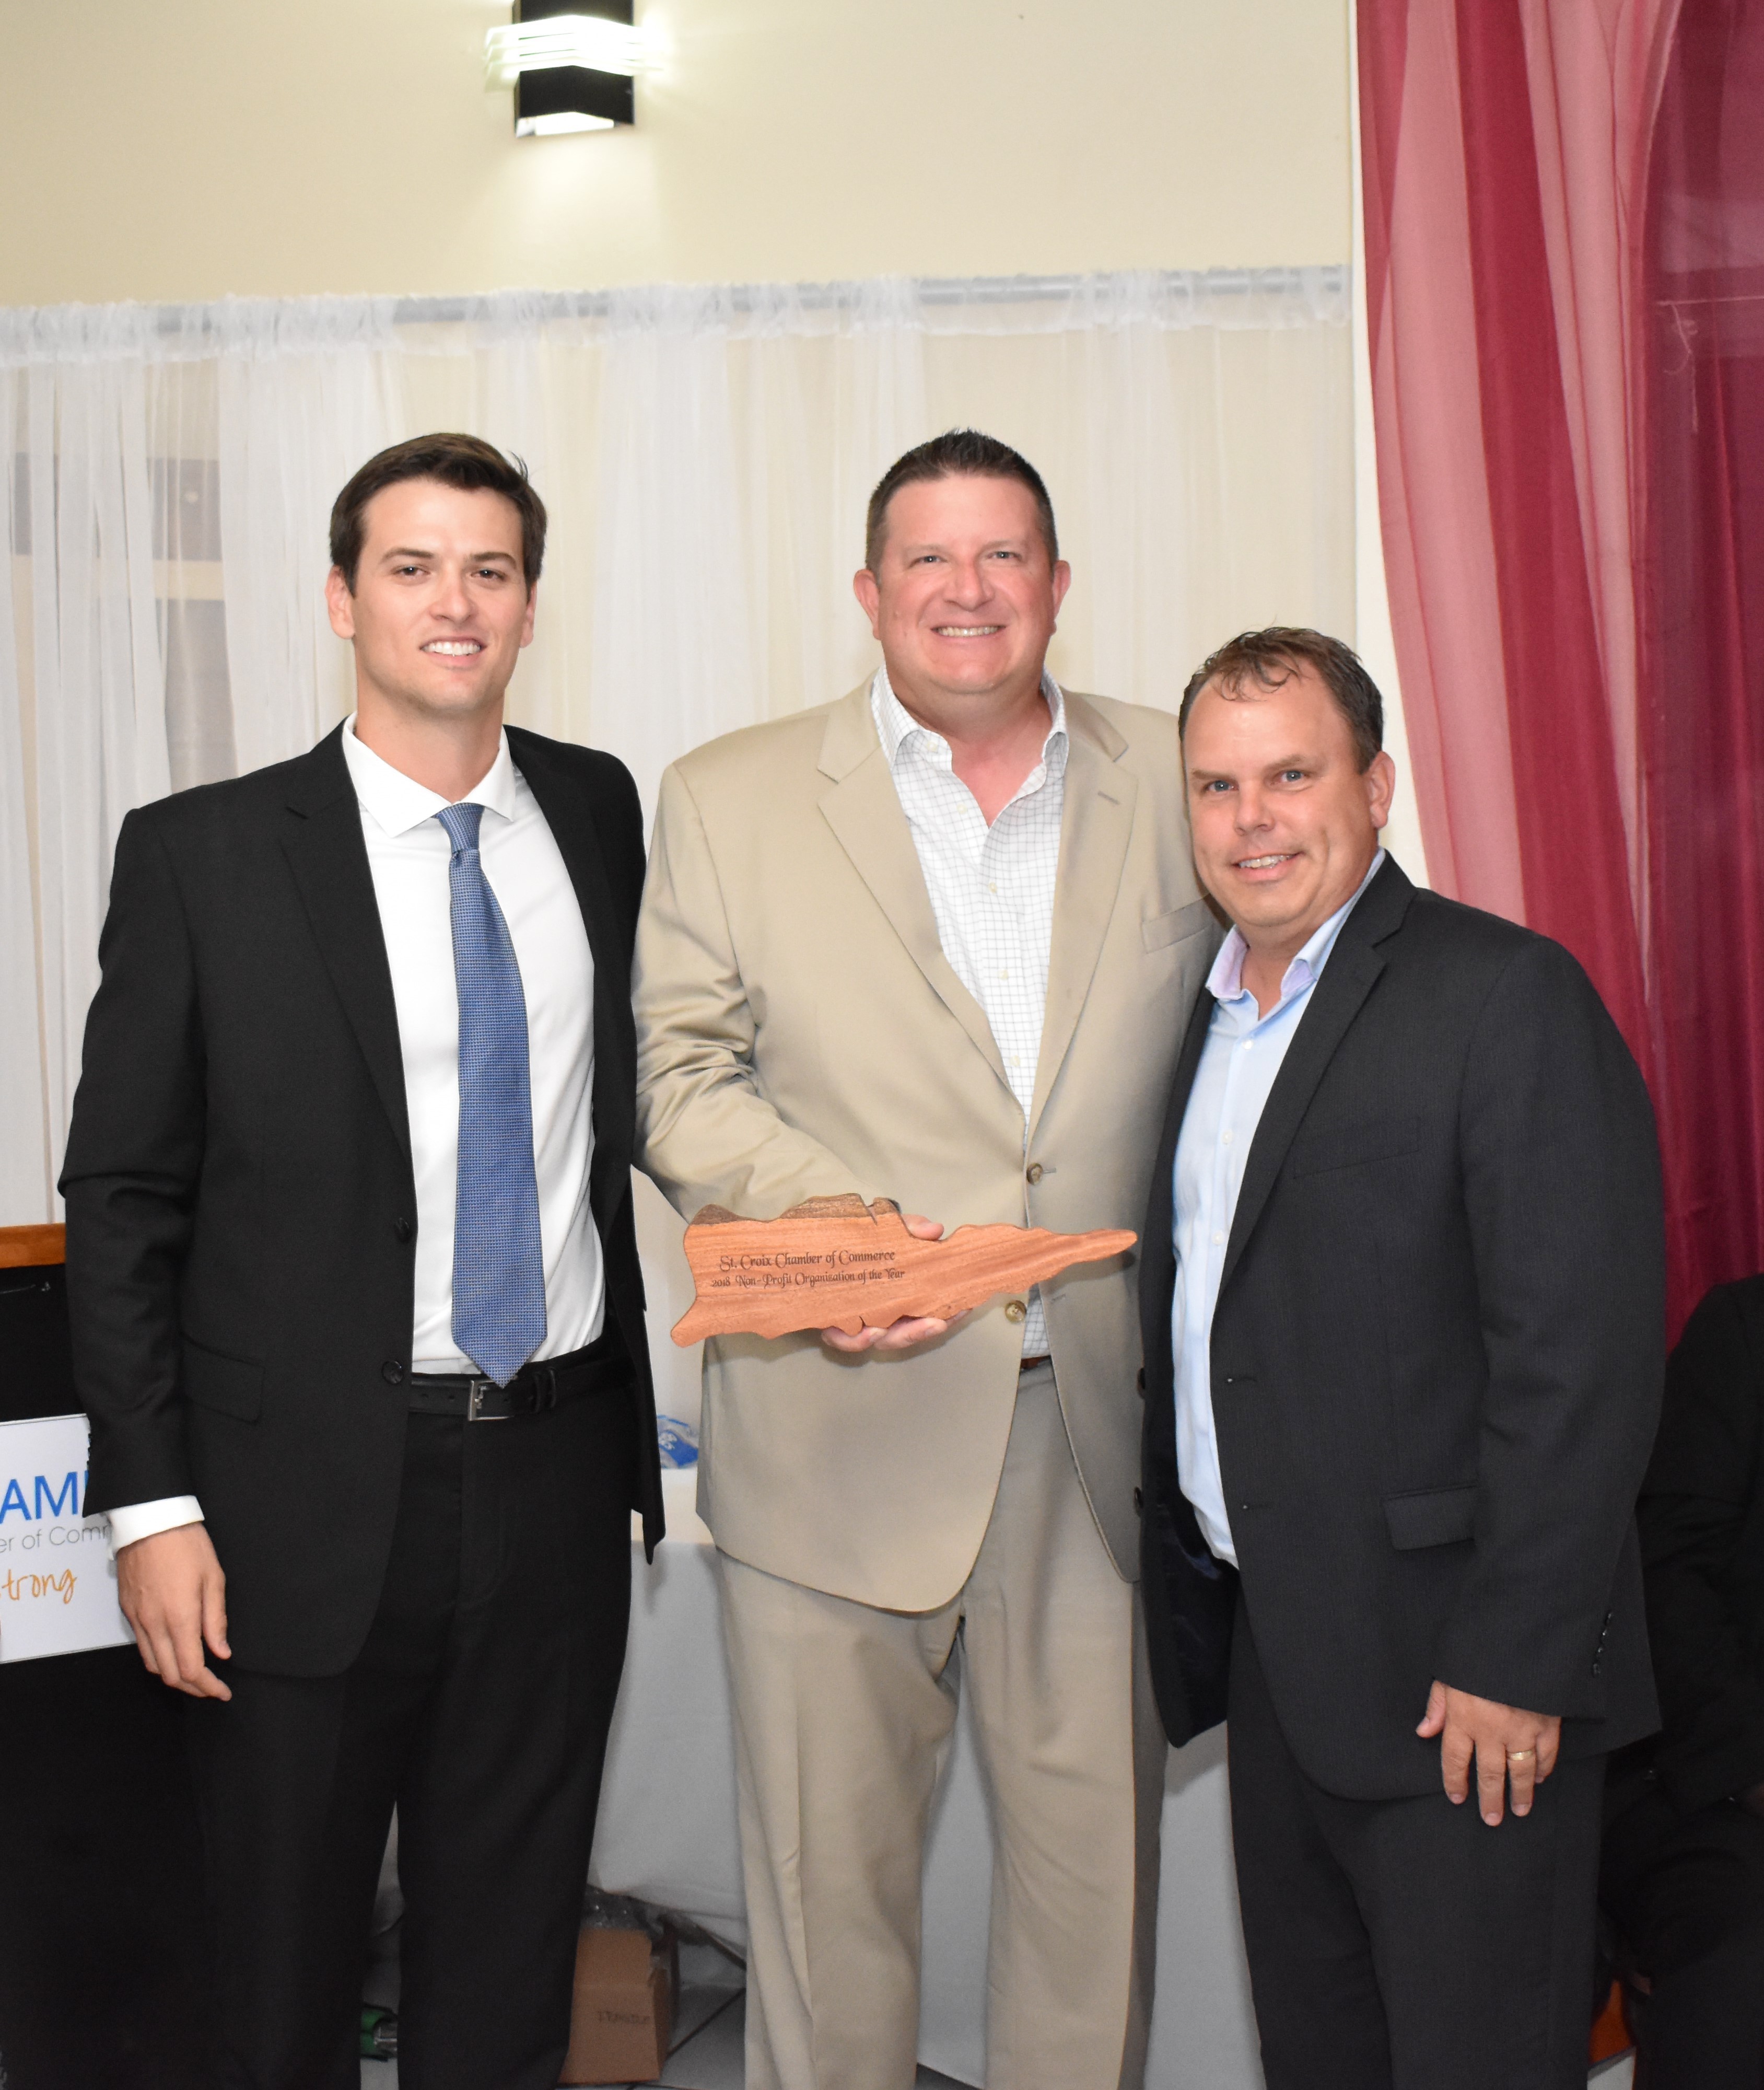 St. Croix Chamber of Commerce President Ryan Nelthropp presents the Nonprofit of the Year Award to David Johnson and Kirk Chewning.